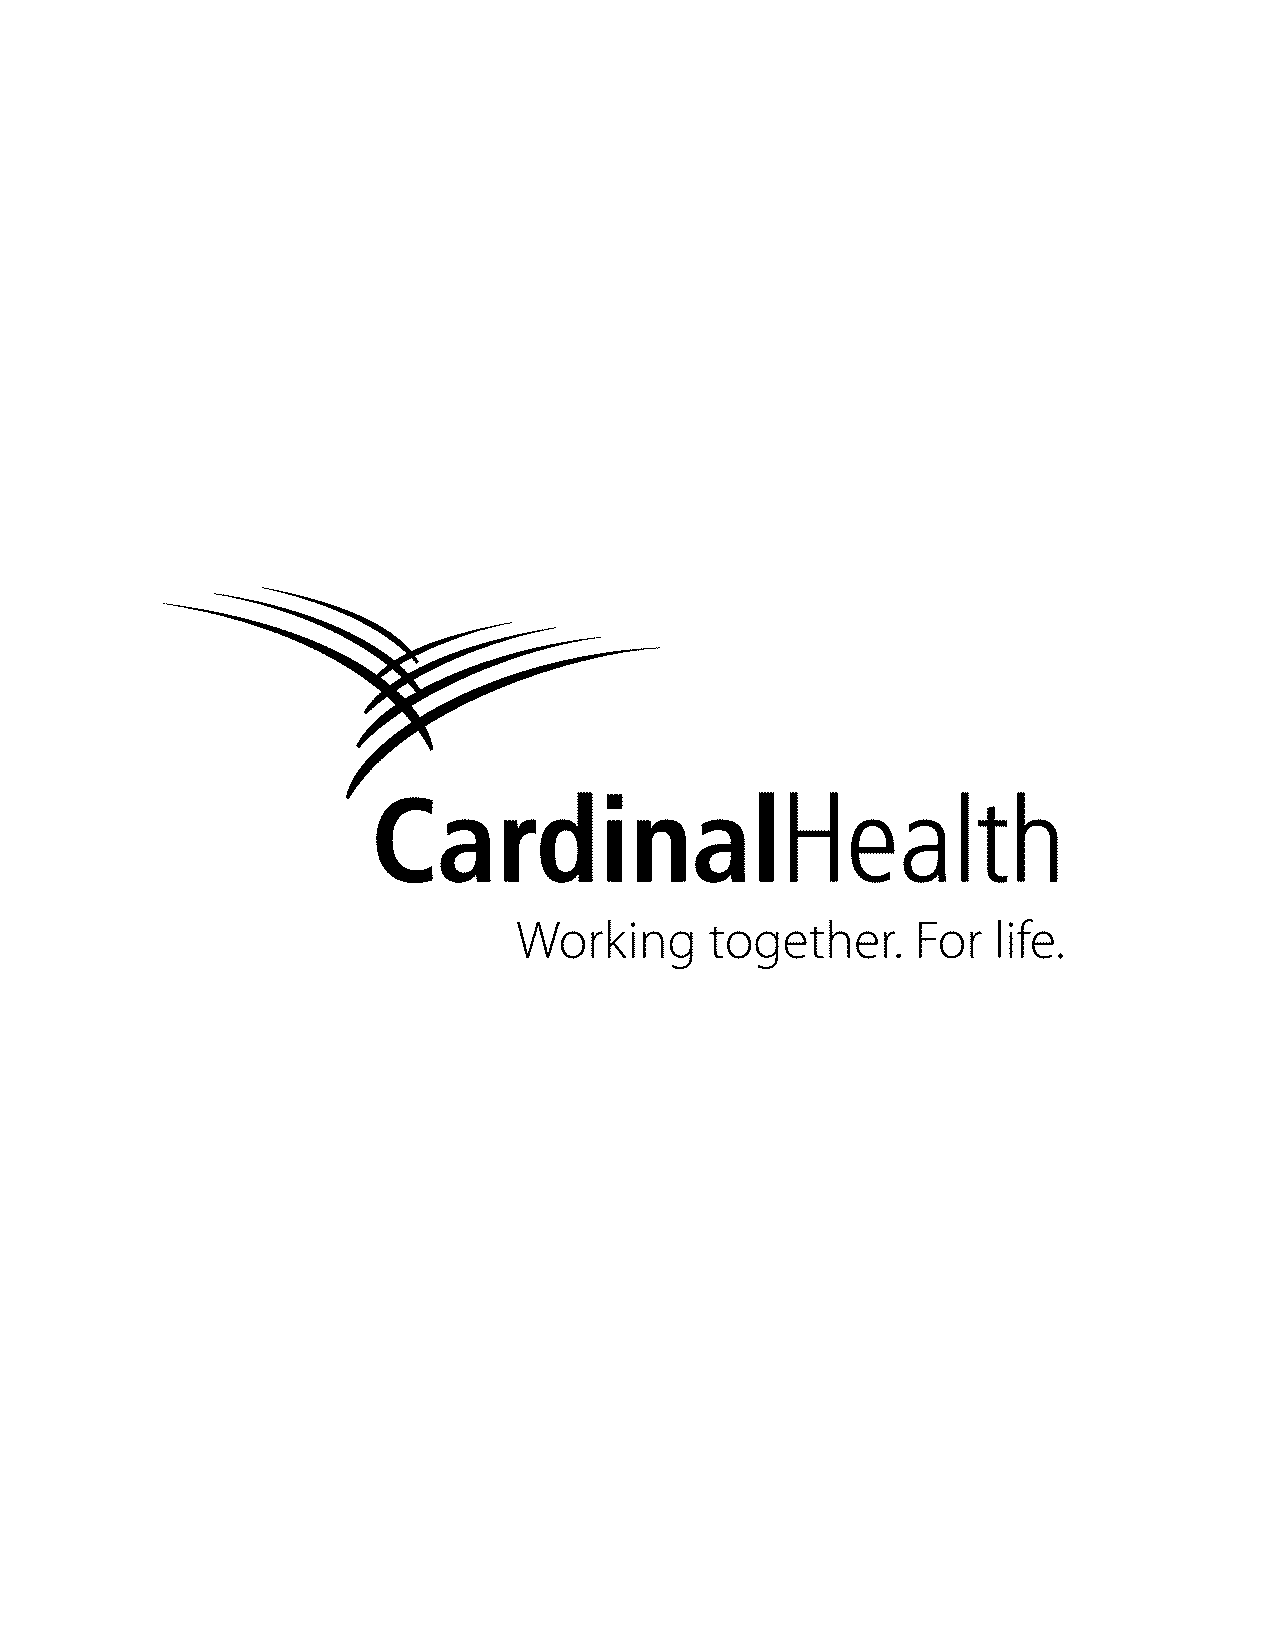  CARDINAL HEALTH WORKING TOGETHER. FOR LIFE.